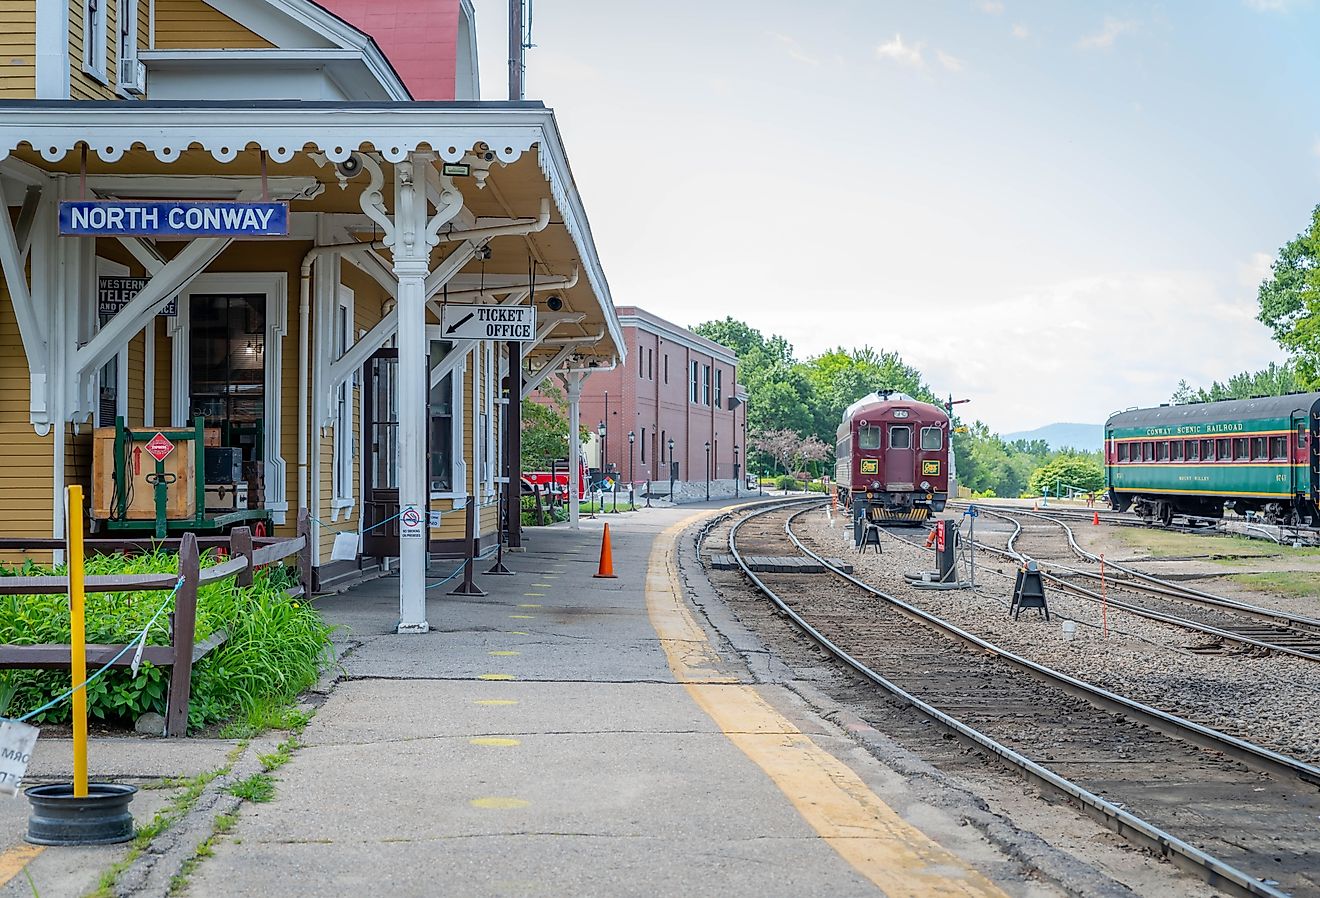  A scenic railcar sits just beyond an empty platform at a historic rail depot in North Conway. Image credit Keith J Finks via Shutterstock.